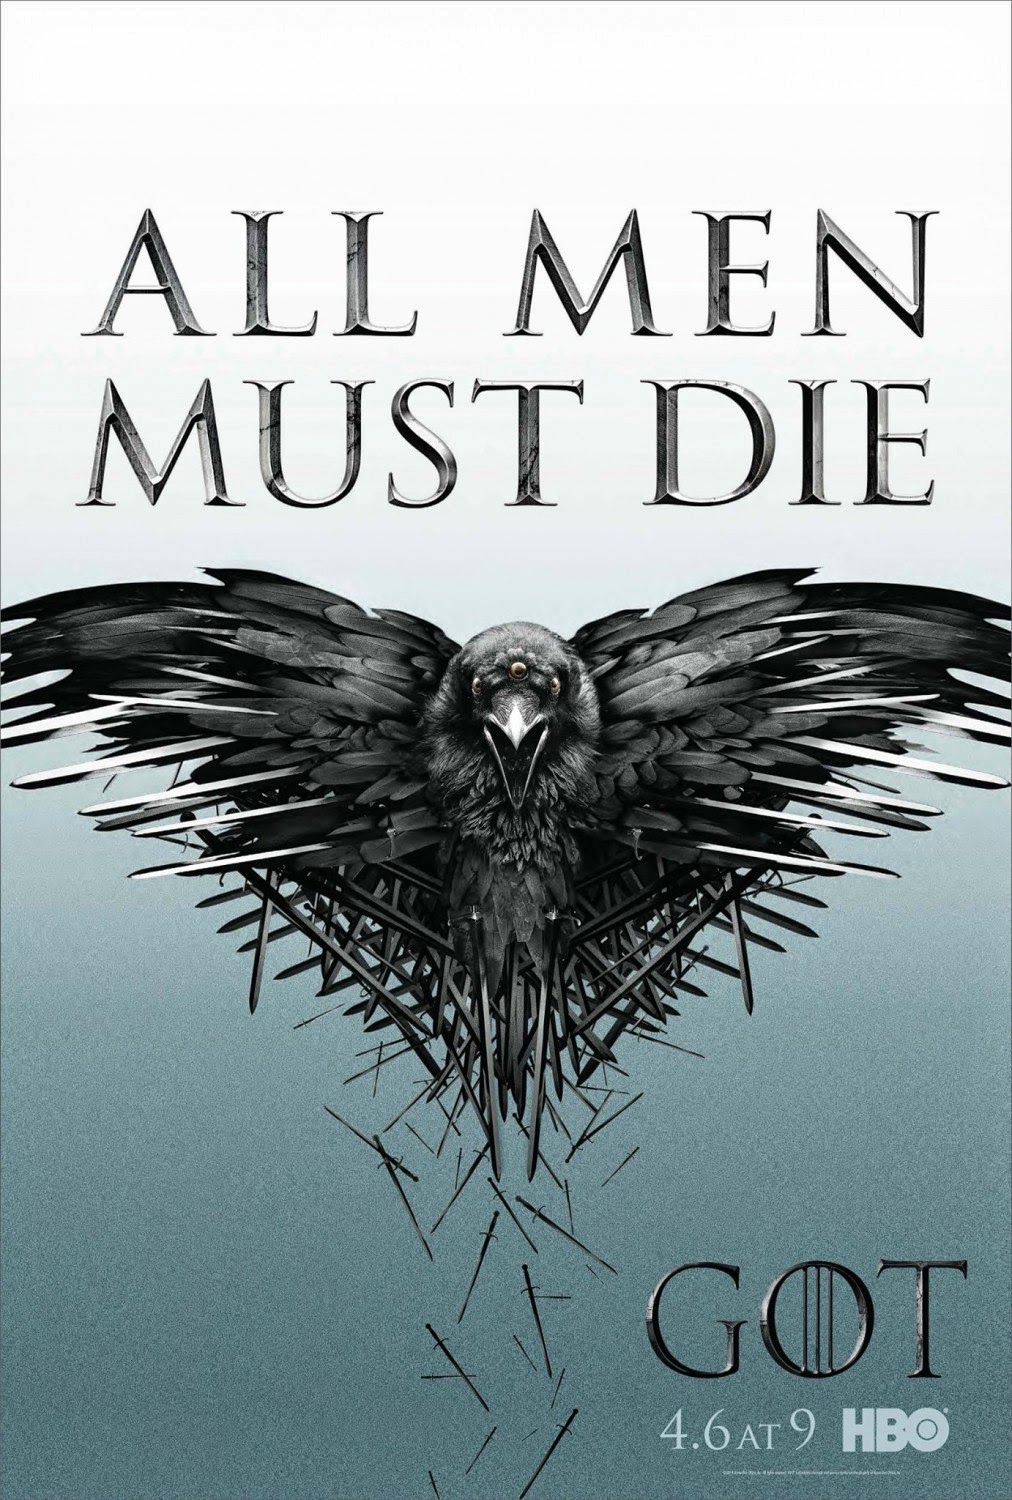 Game of Thrones Season 4 Valar Morghulis Teaser Character Television Poster Set - All Men Must Die